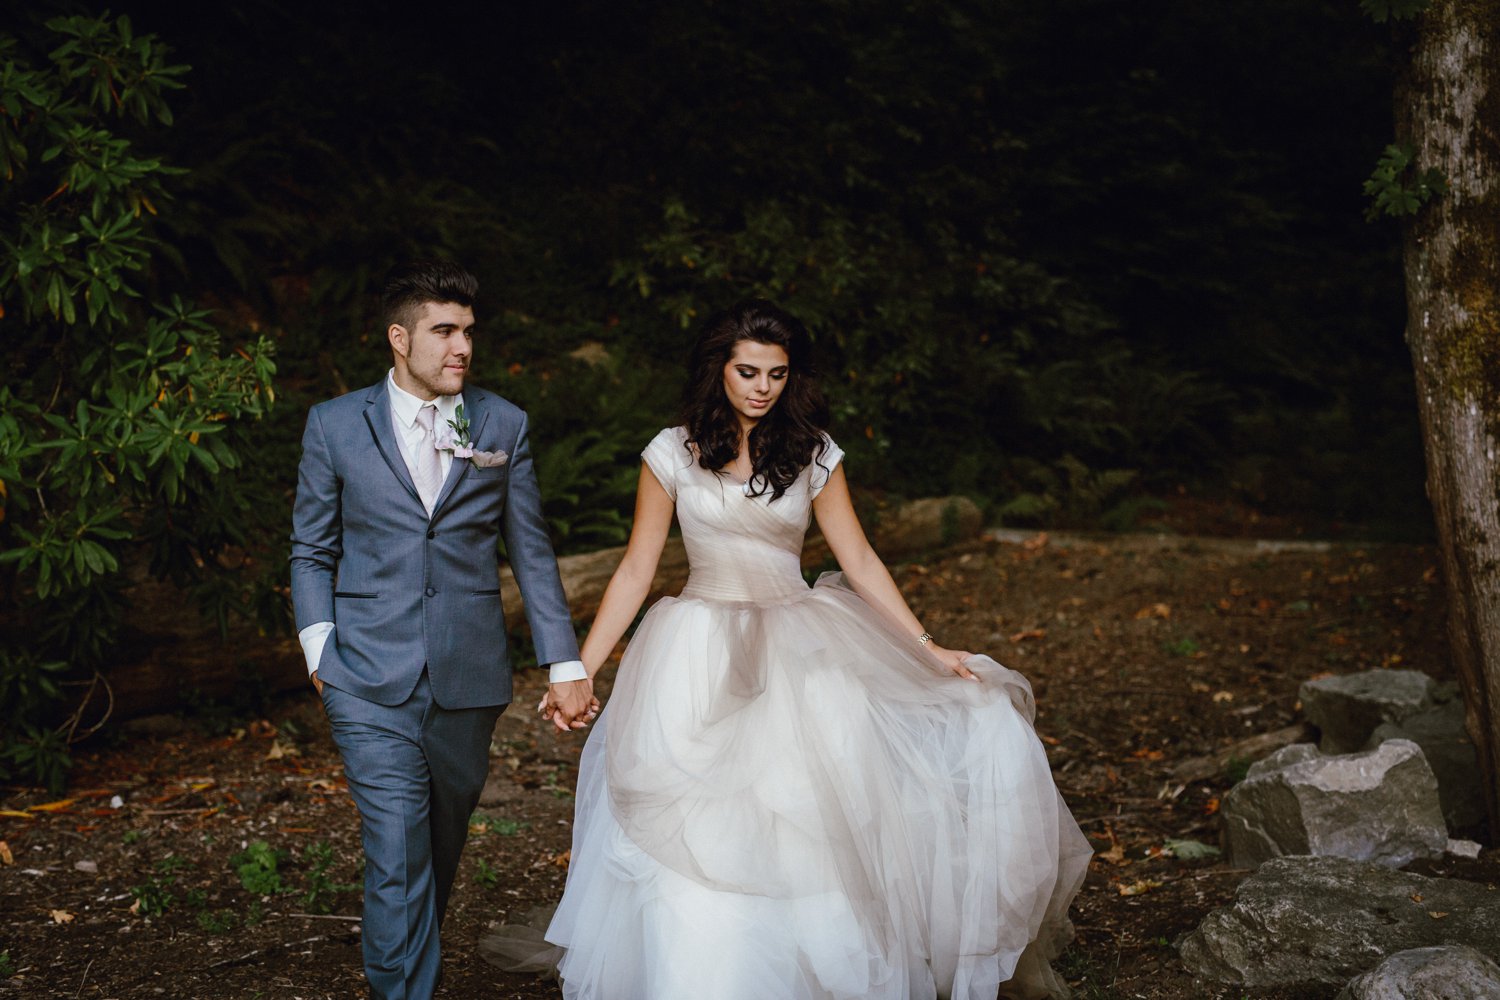 The bride and groom walk together in the Portland Rose Garden by photographer Catalina Jean